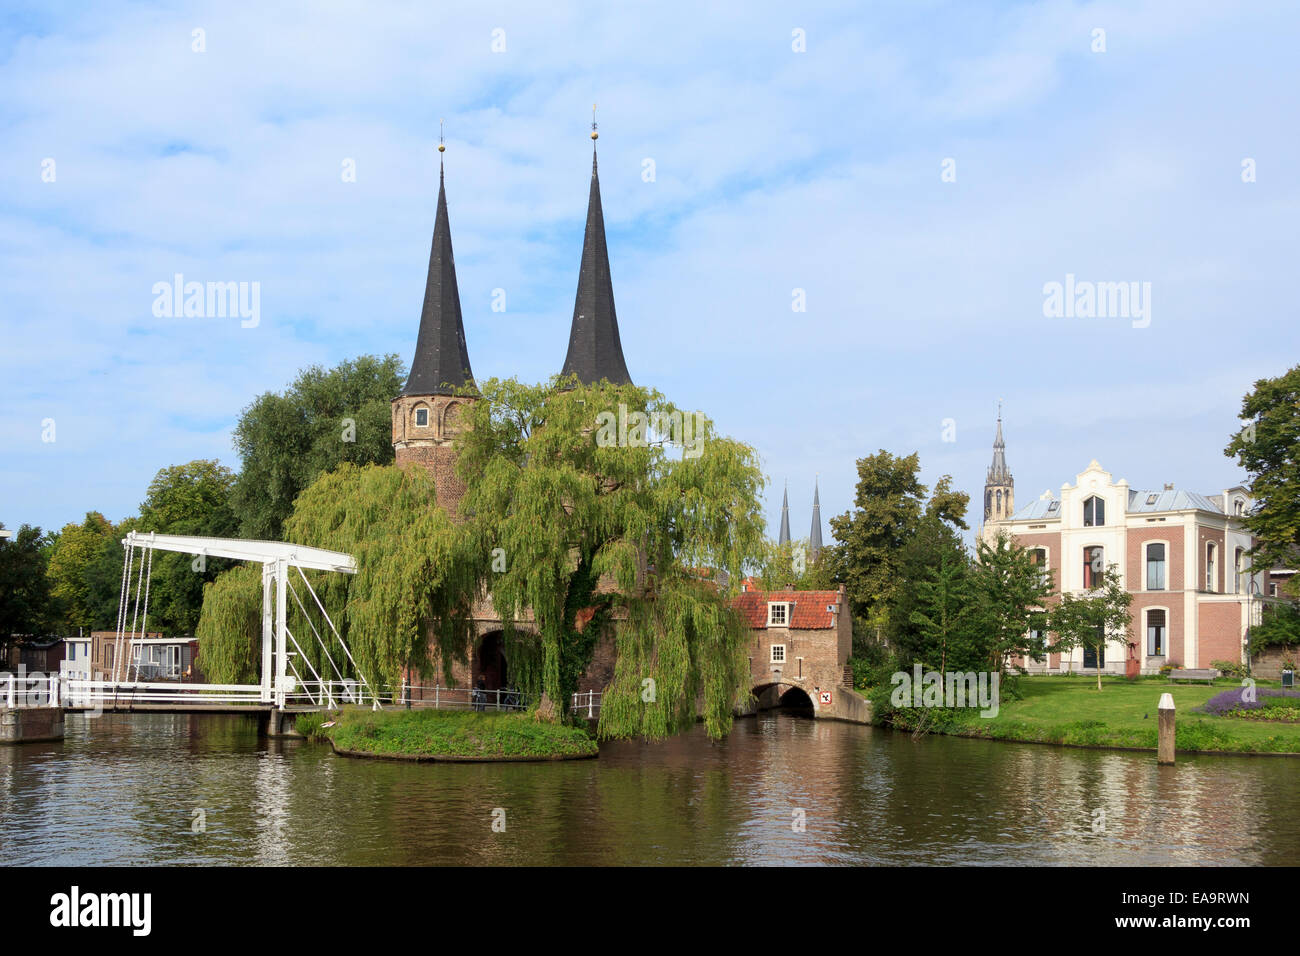 The East Gate to the City of Delft, The Netherlands Stock Photo